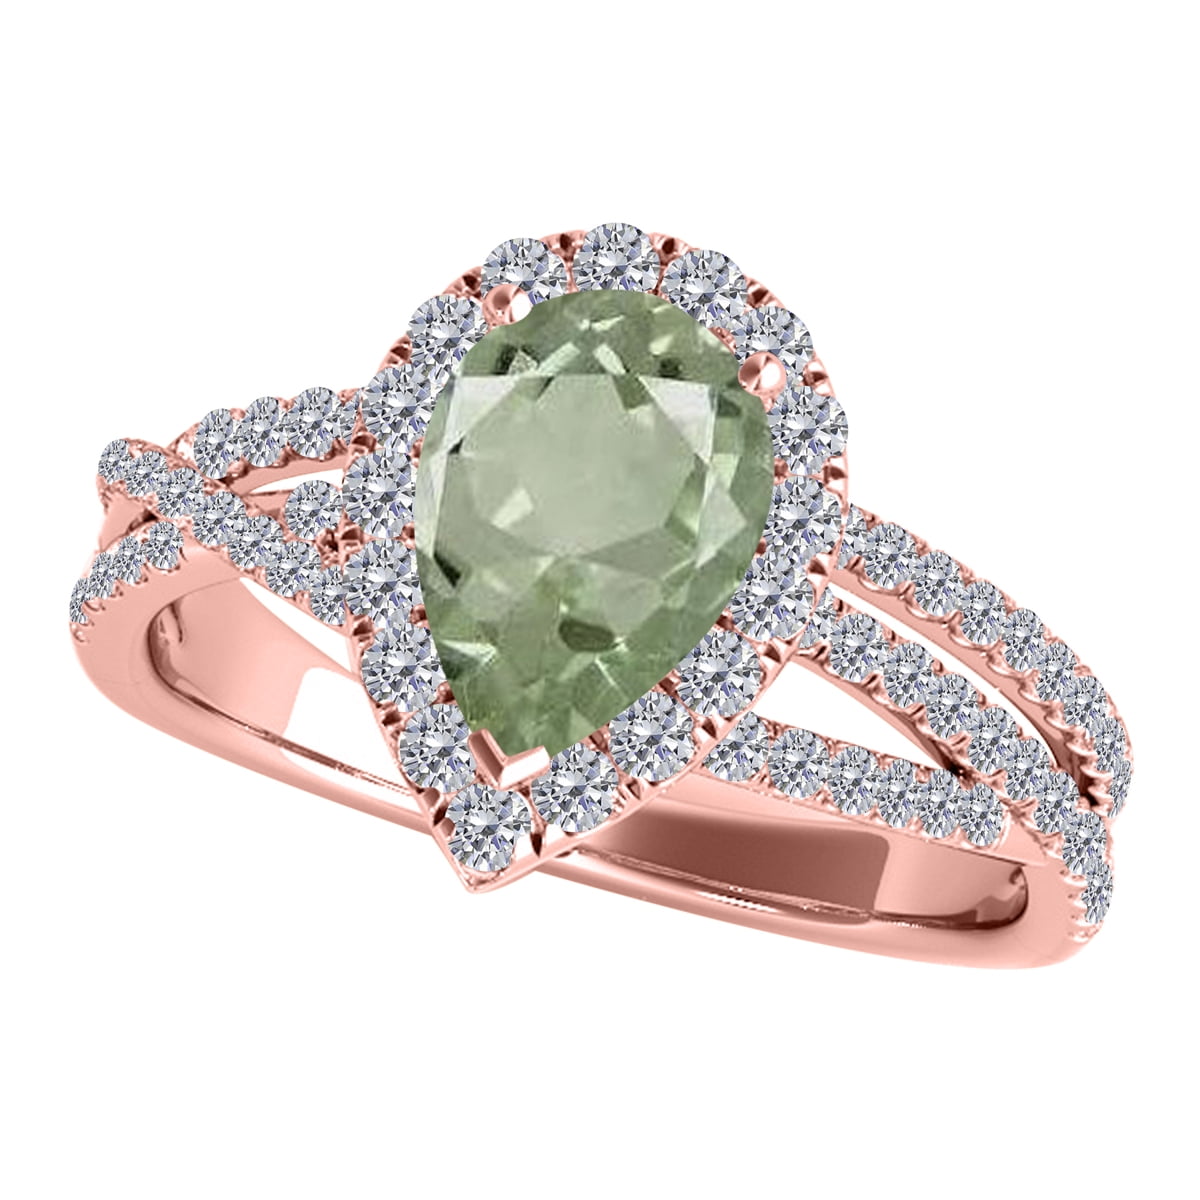 Mauli Jewels Rings for Women 2.34 Carat Diamond and Pear Shaped Green  Amethyst Ring Shared-prong 10K Rose Gold